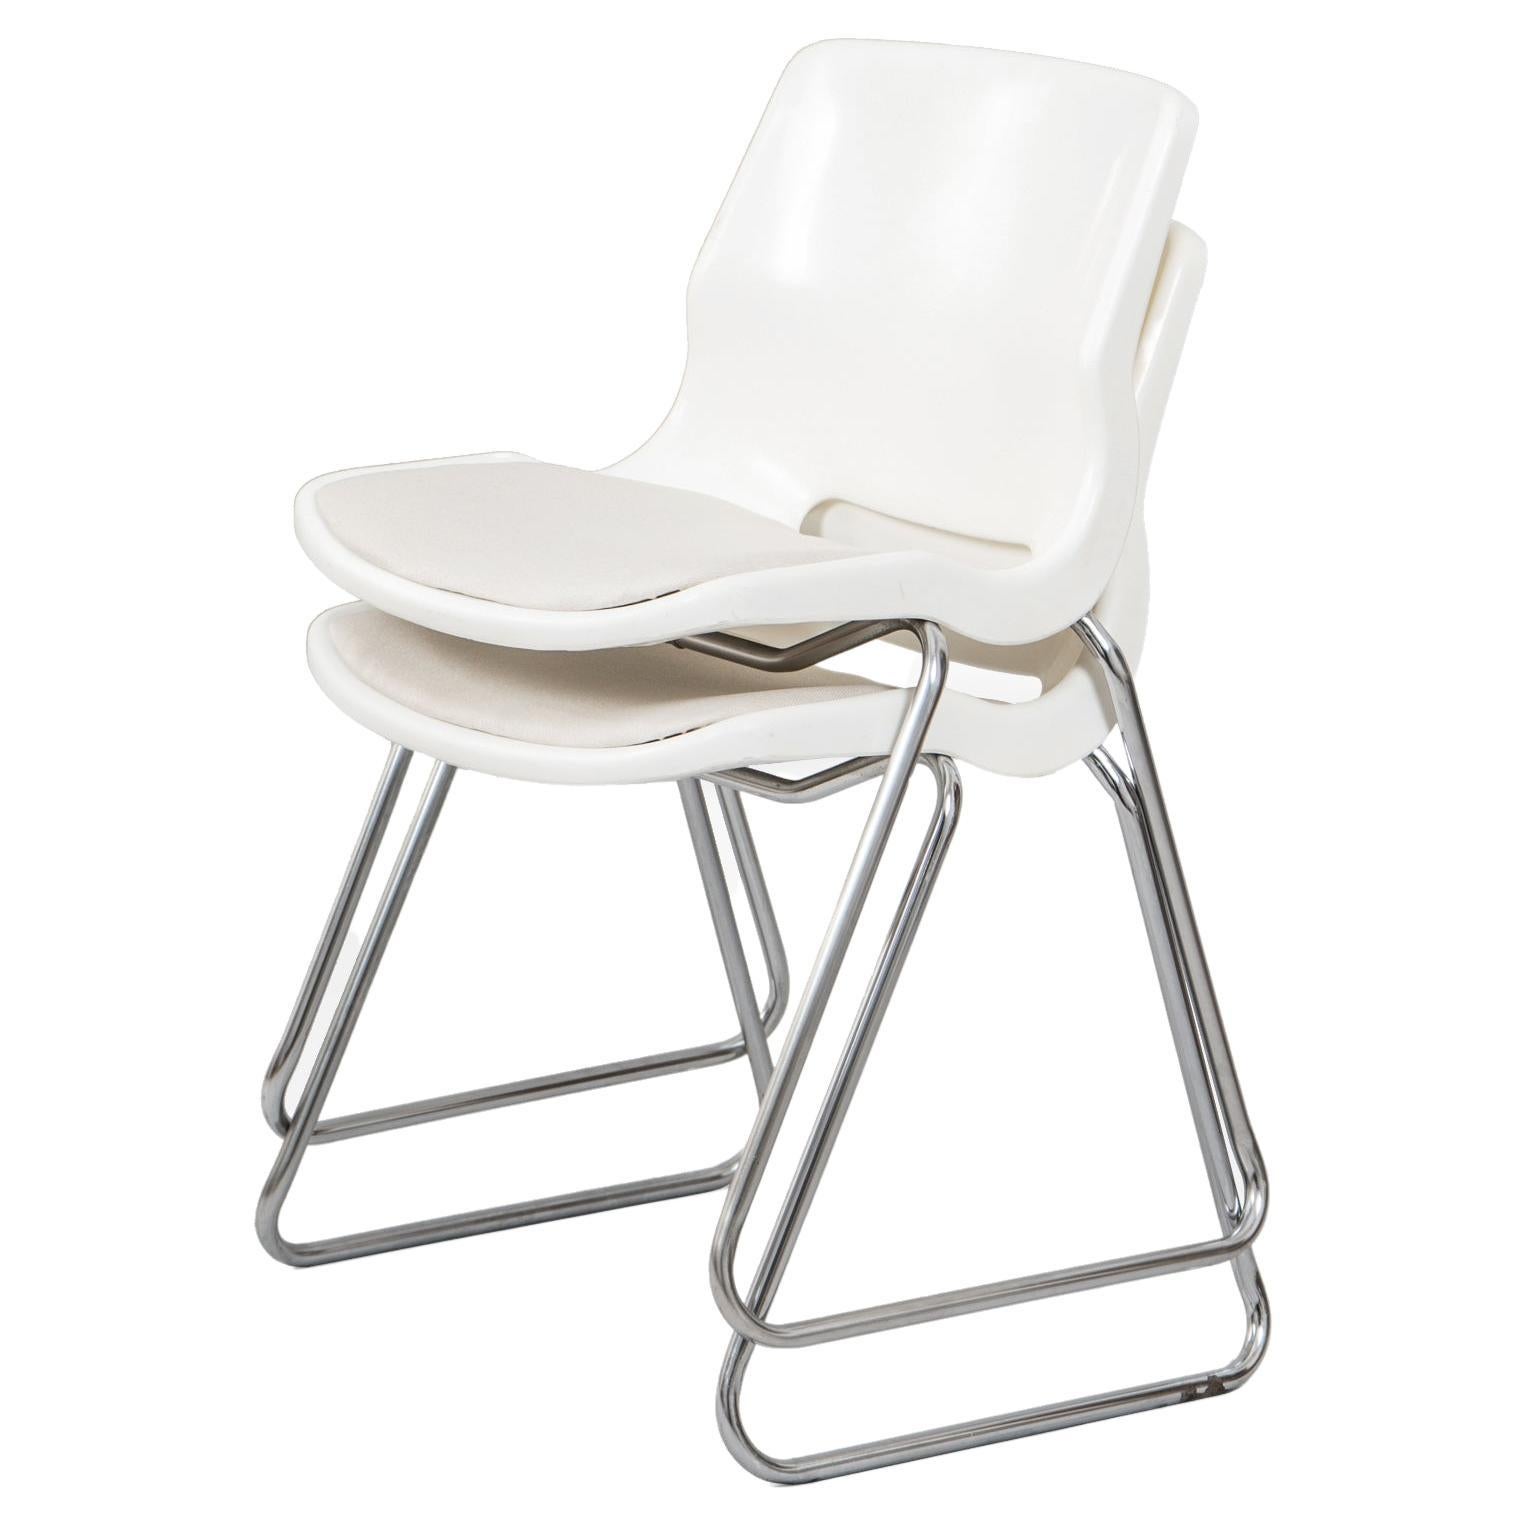 Overman Sweden Chairs